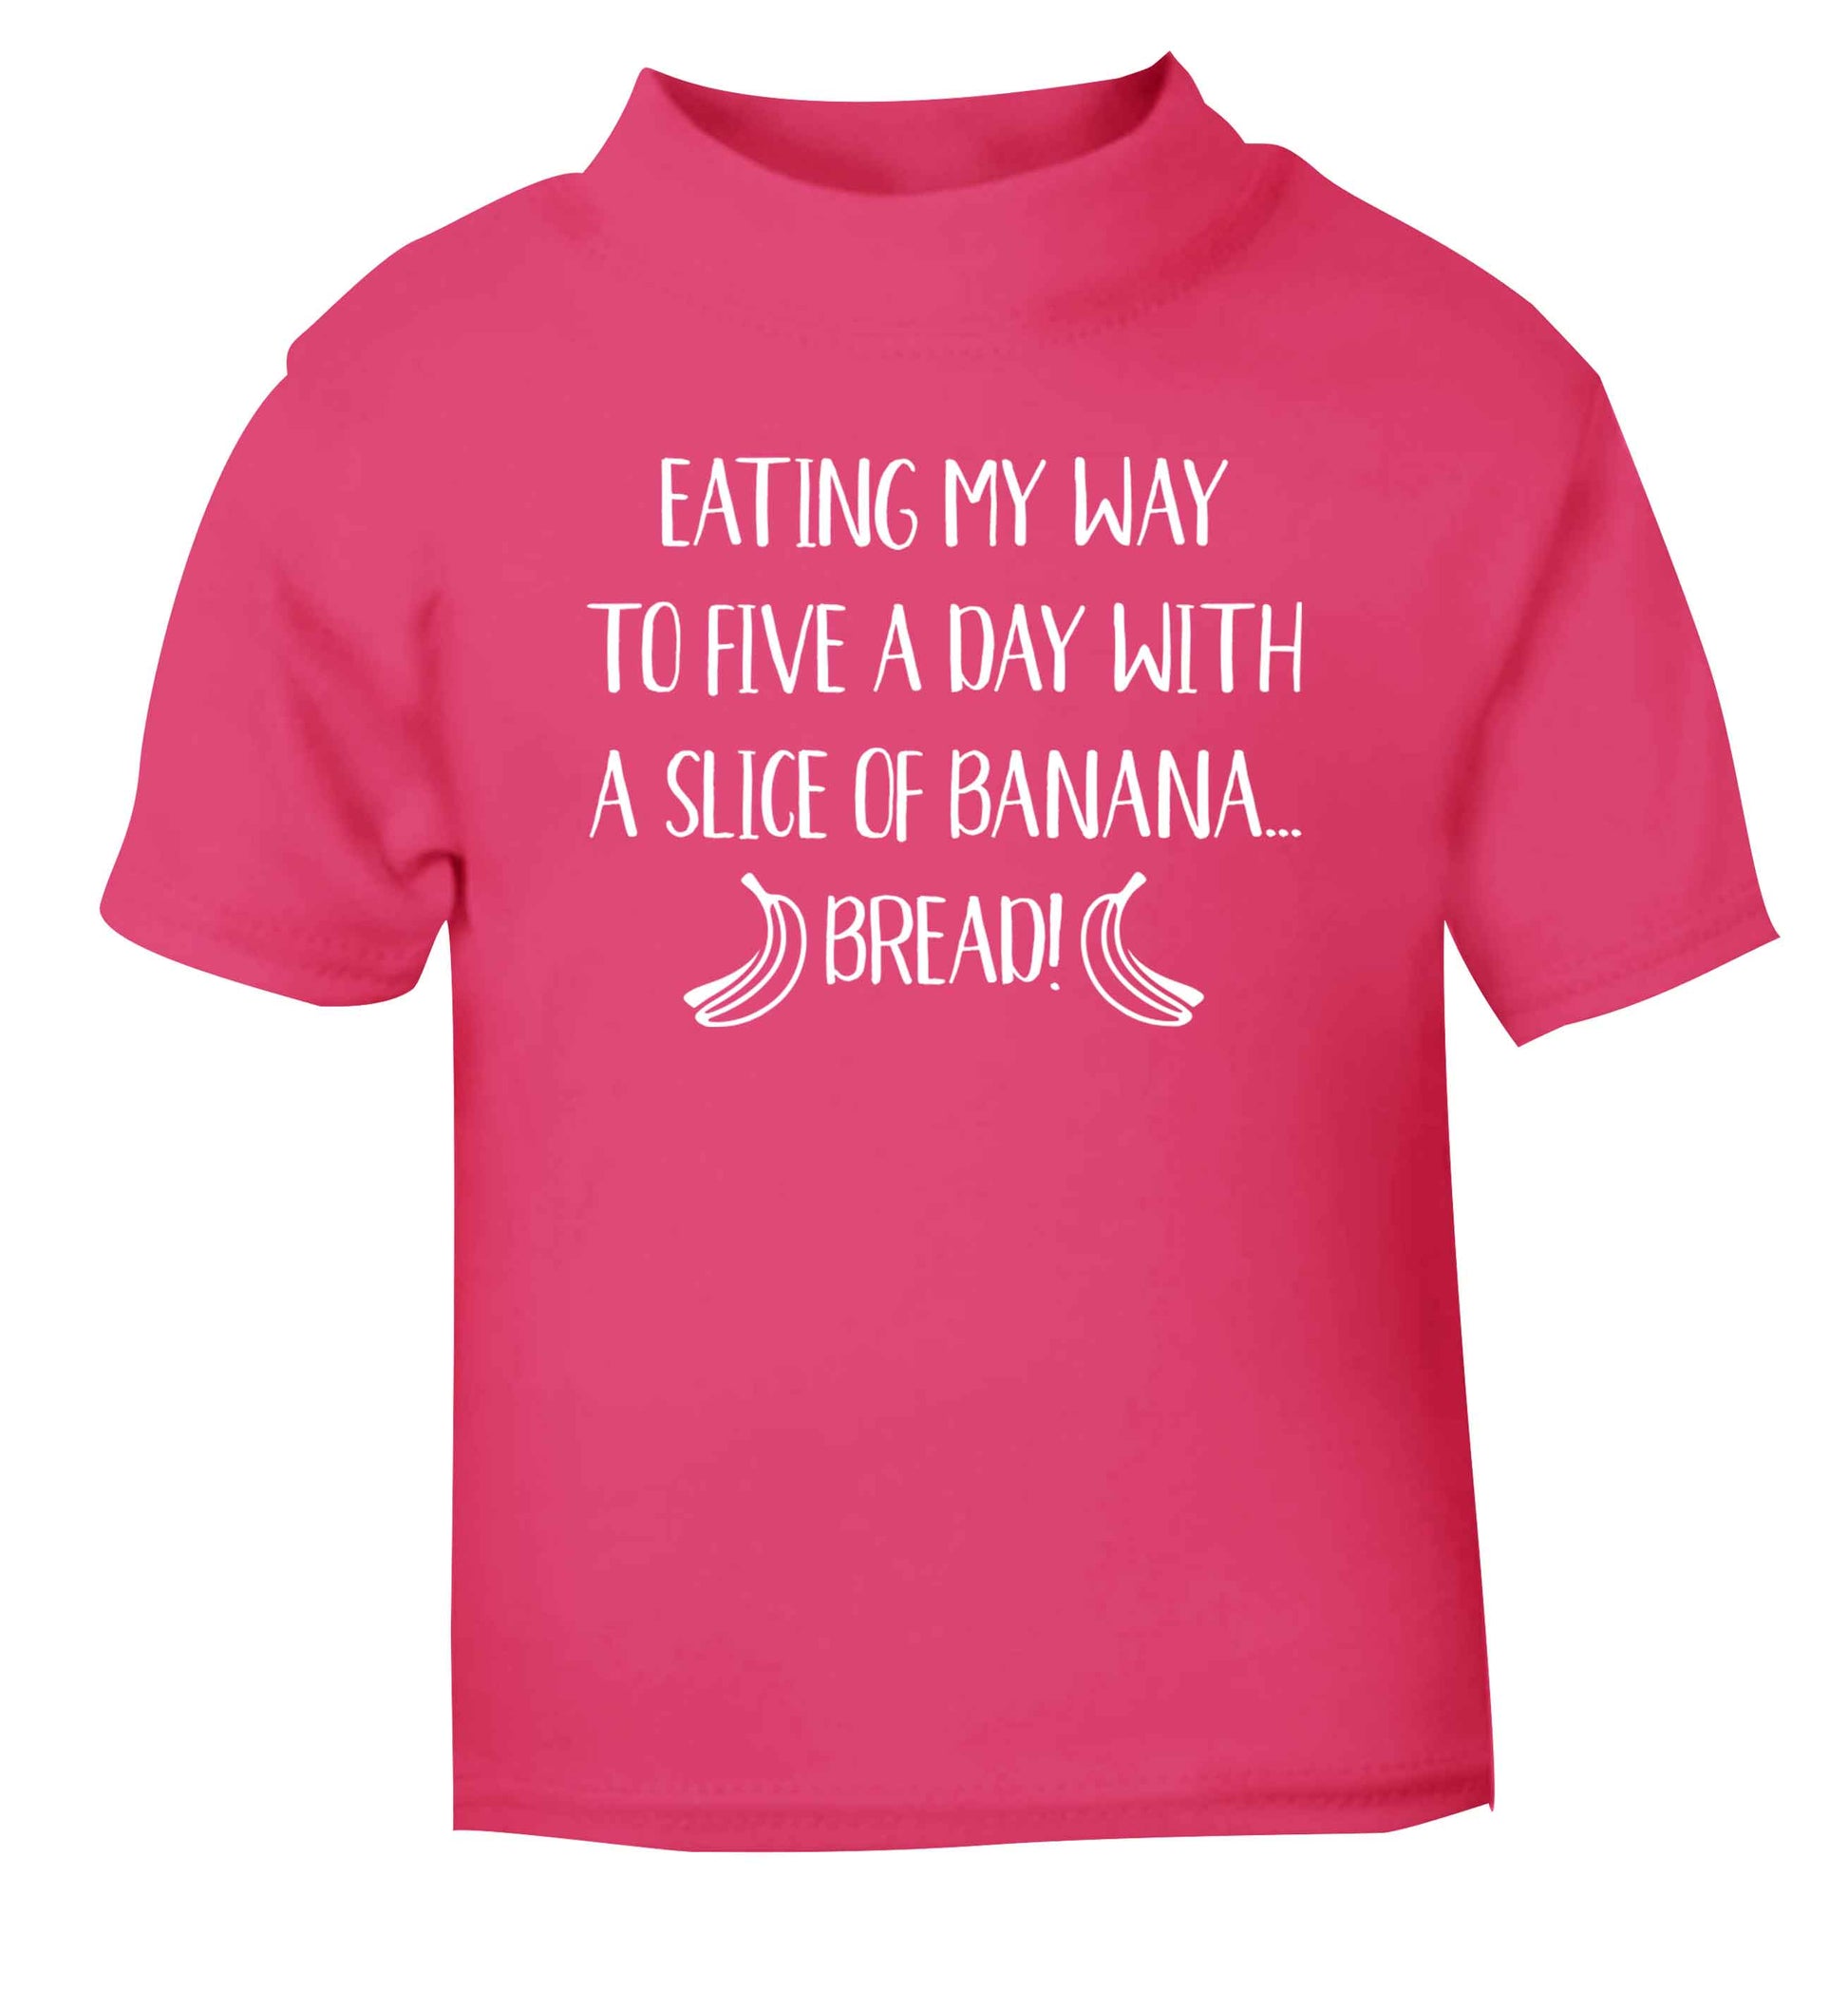 Eating my way to five a day with a slice of banana bread pink Baby Toddler Tshirt 2 Years